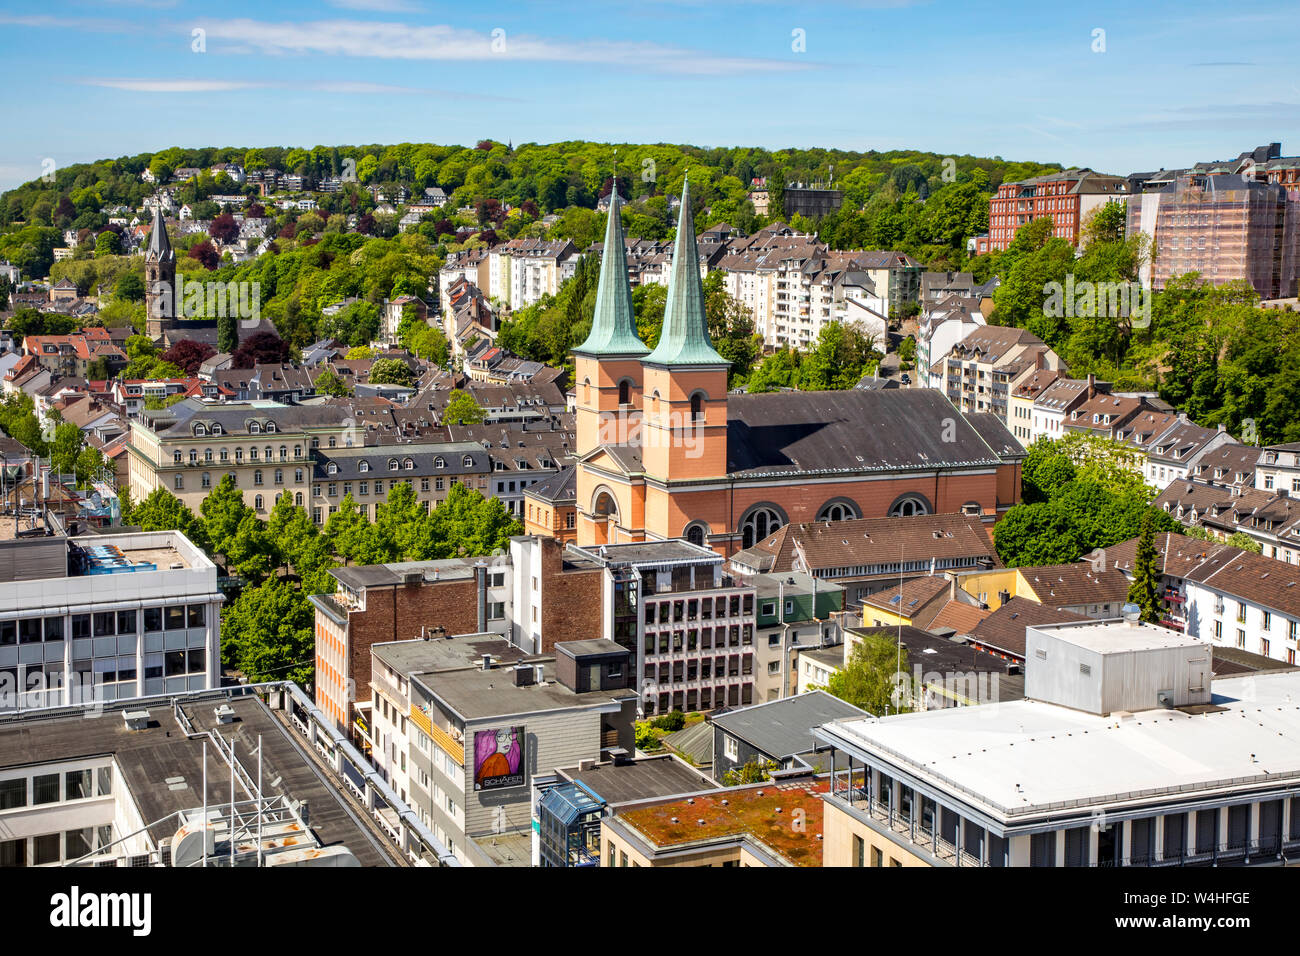 Wuppertal Elberfeld, panoramic view over the northern city centre, Germany Stock Photo